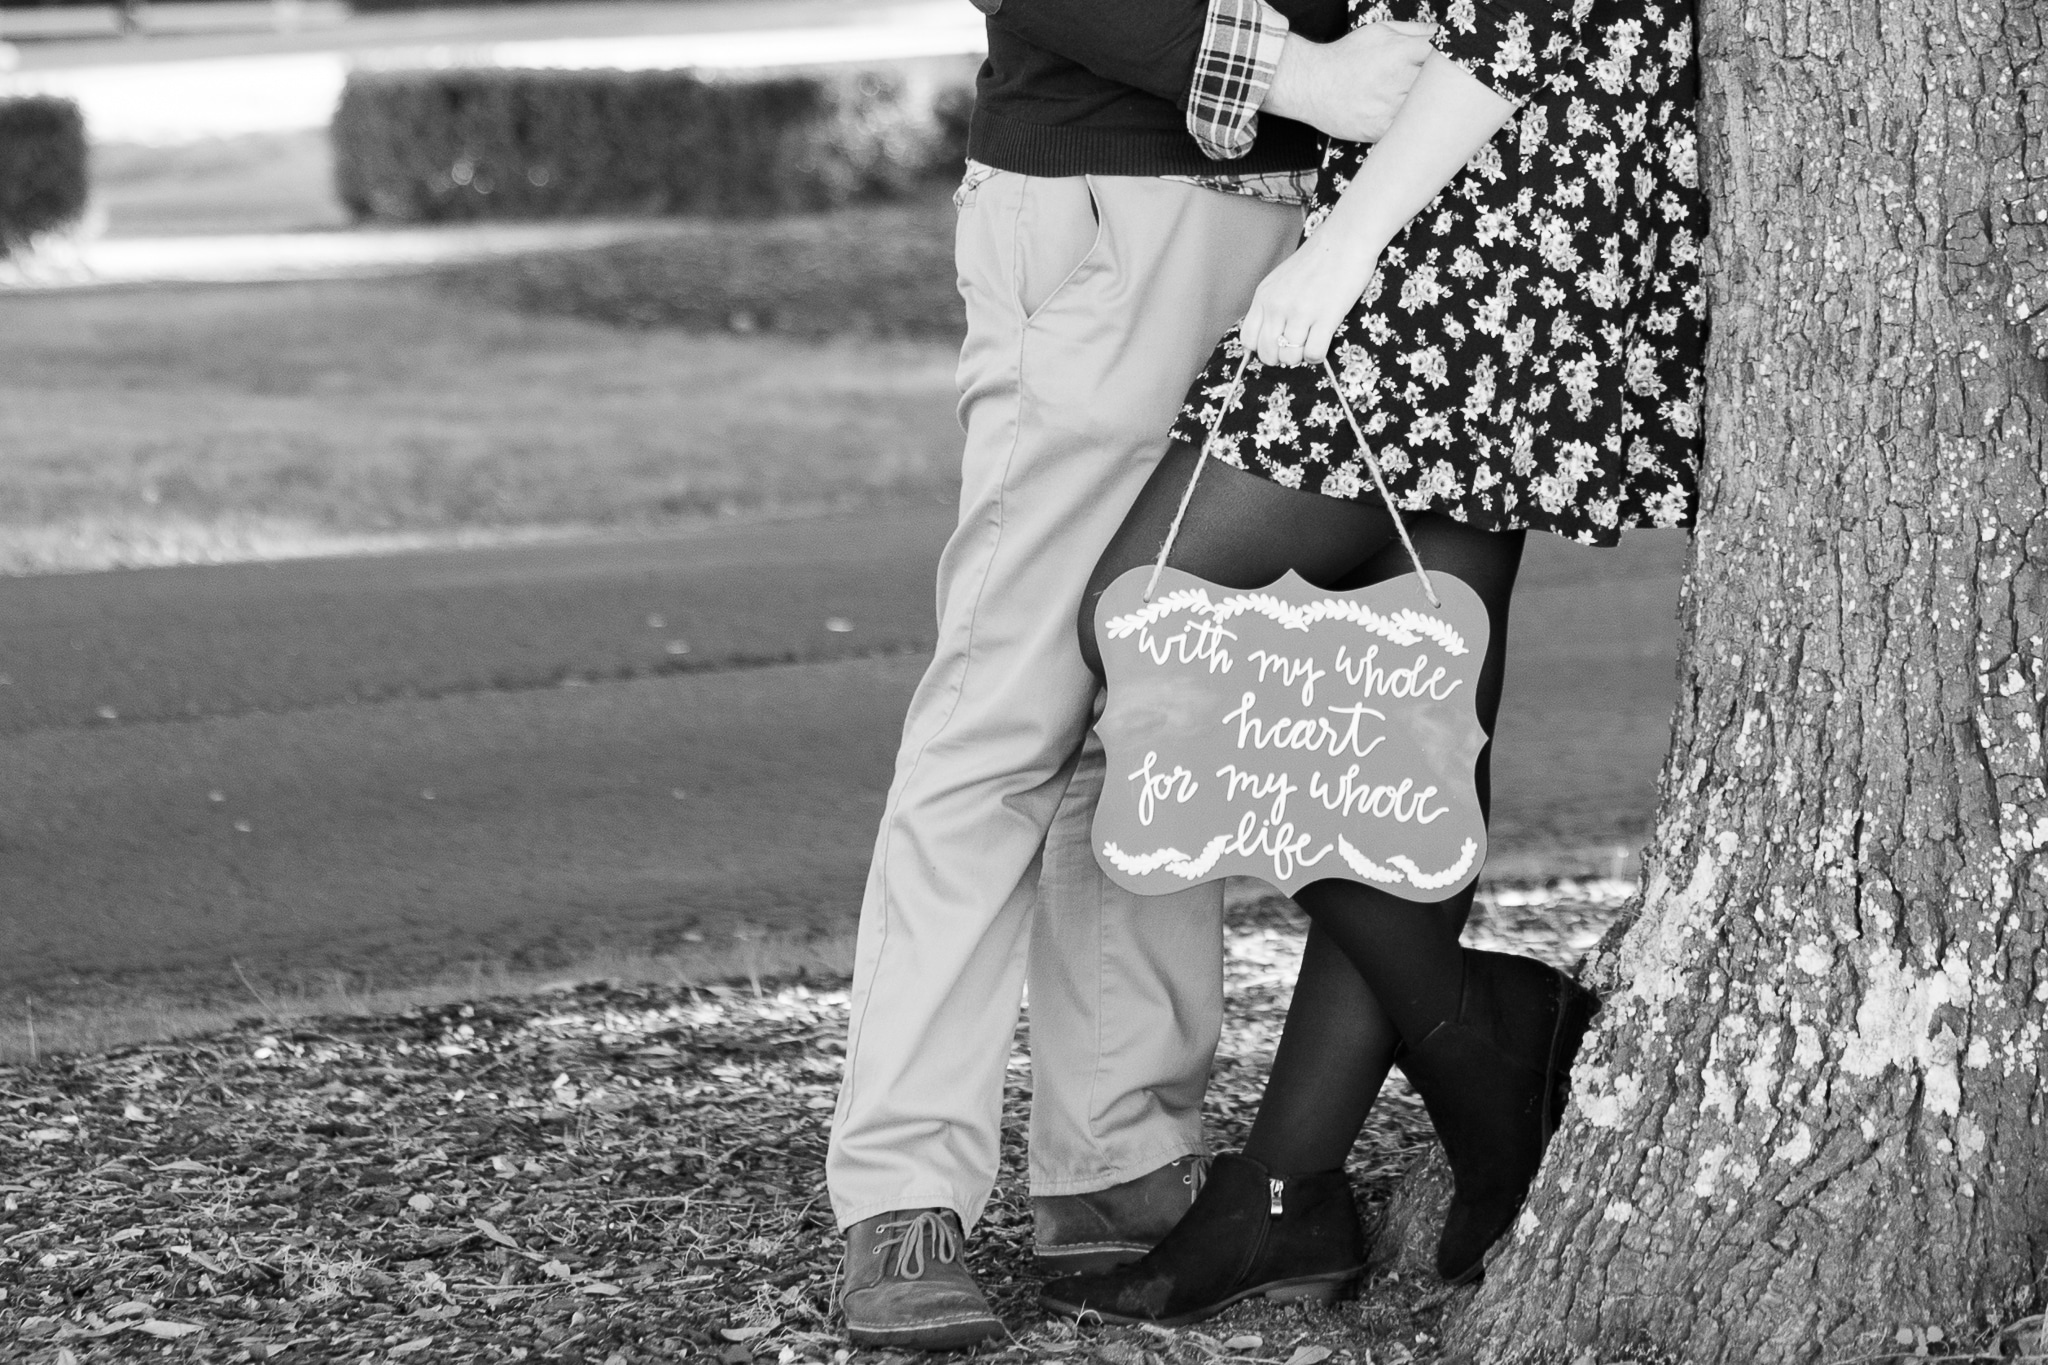 Brian and Kelsey, Black and white posed under a tree with a chalkboard sign Caledonia Golf and Fish Club, Myrtle Beach Engagement Photography Session 2